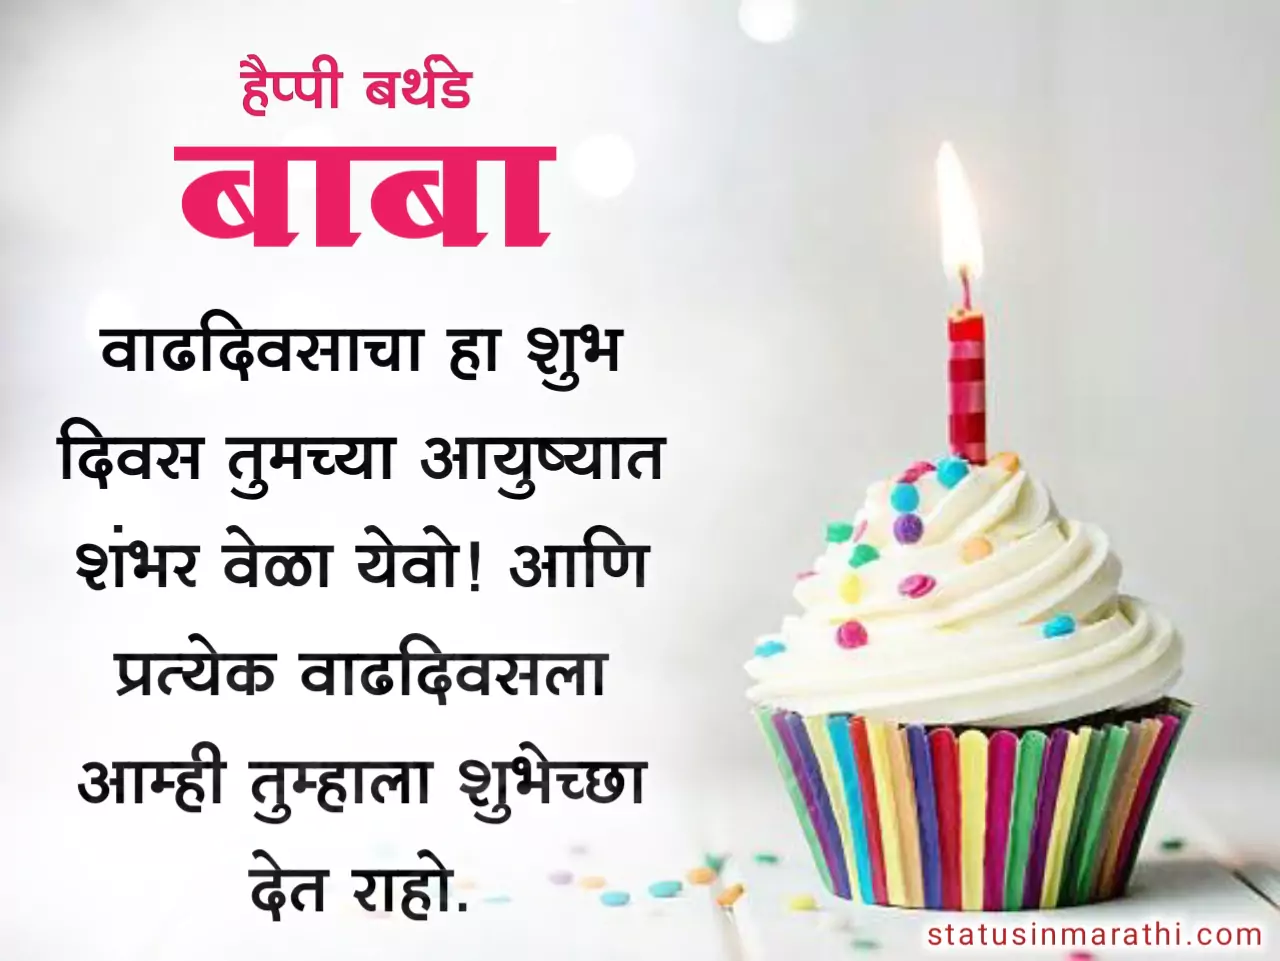 Happy Birthday wishes for father in marathi